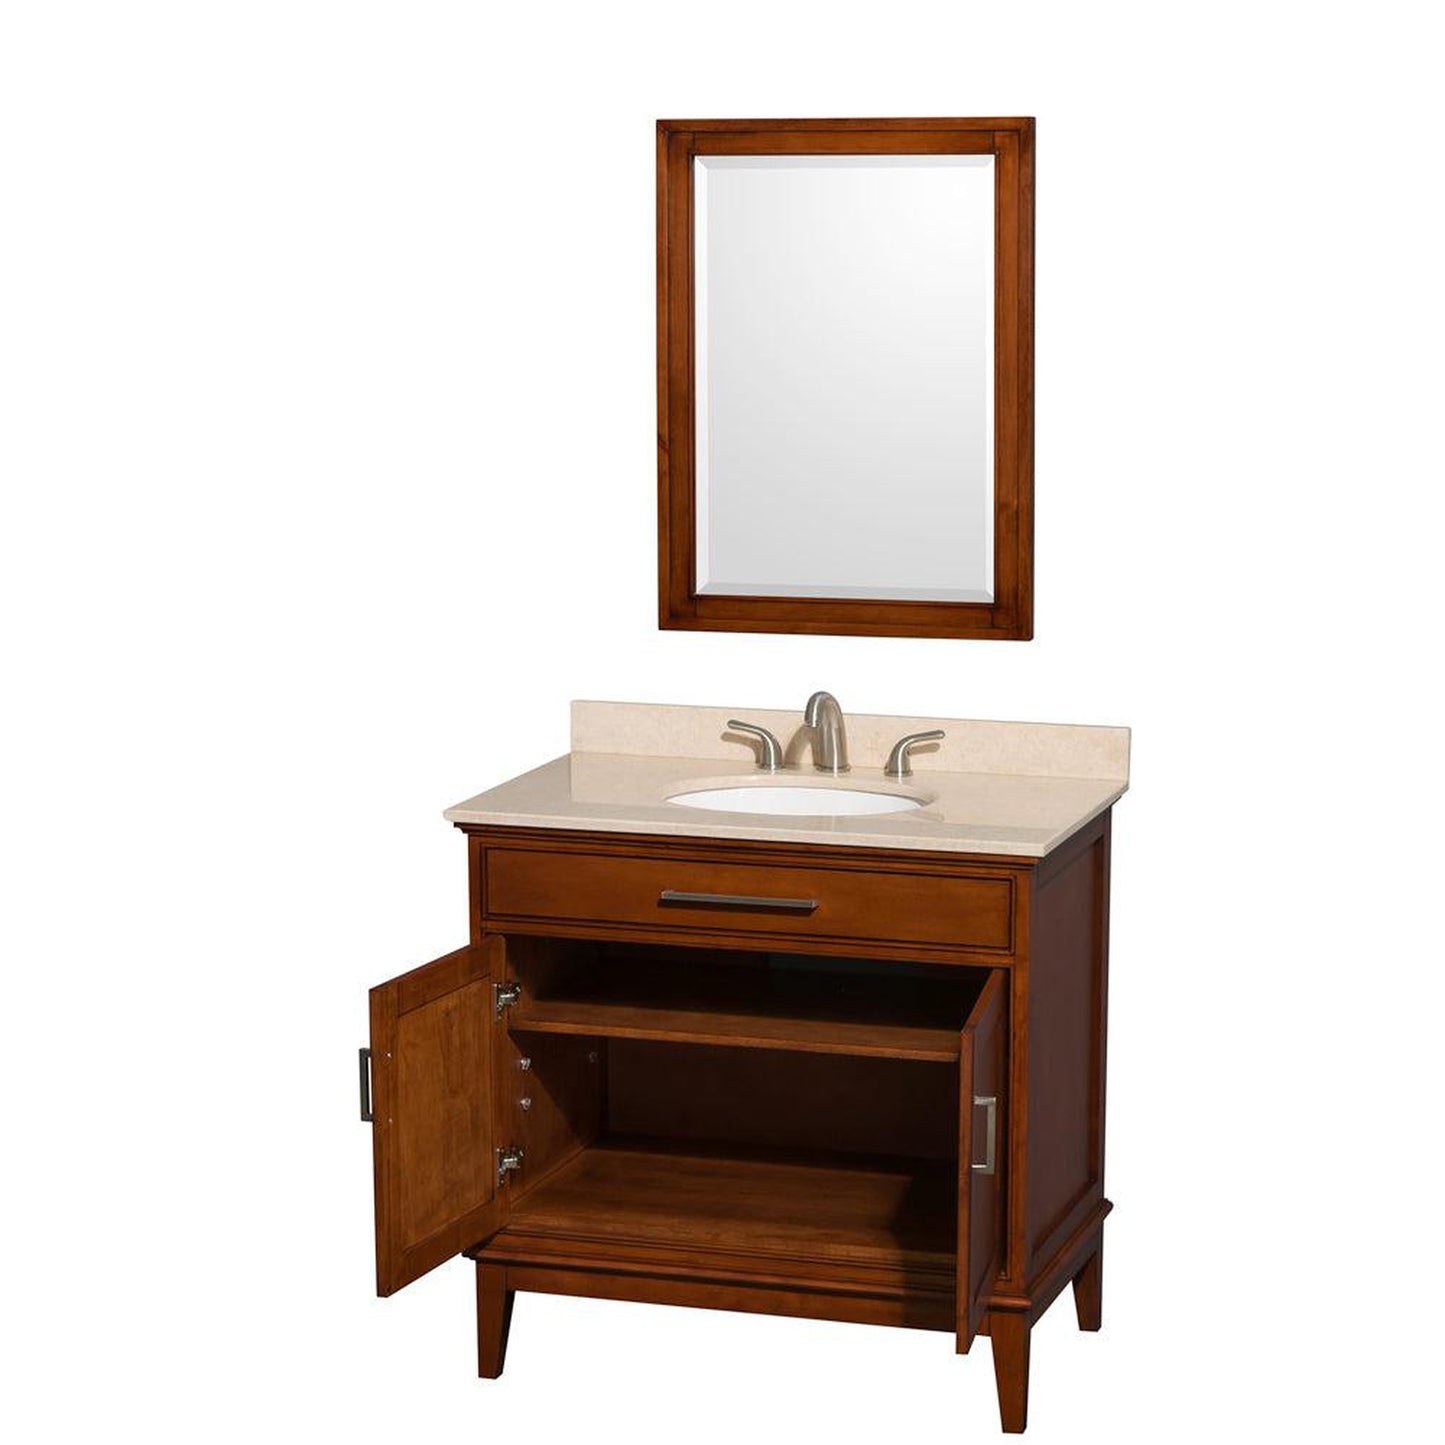 Wyndham Collection Hatton 36" Single Bathroom Vanity in Light Chestnut, Ivory Marble Countertop, Undermount Oval Sink, and 24" Mirror